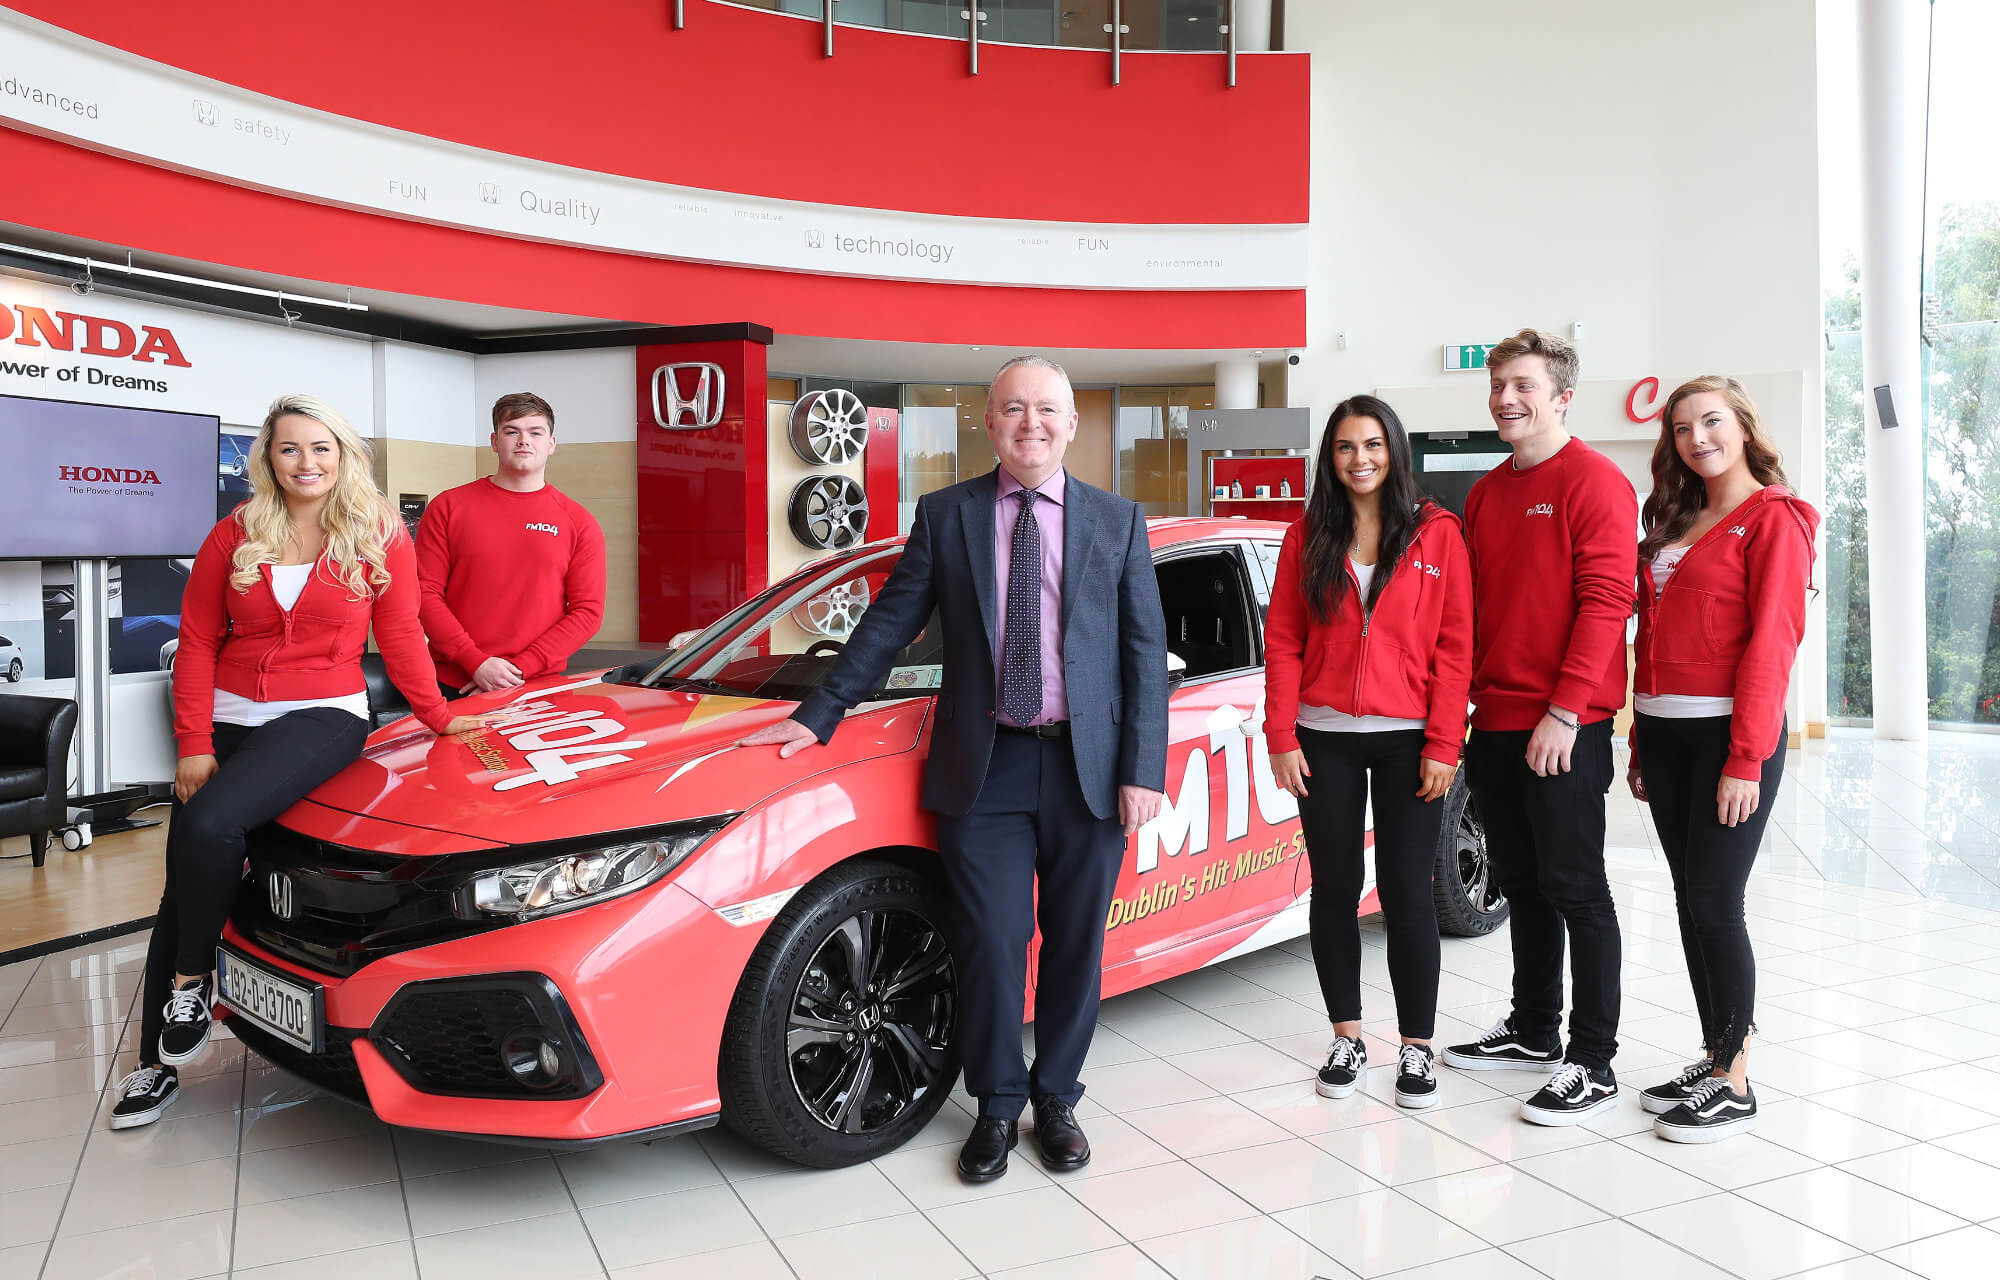 FM104 unveils new promotional team with Honda Civic